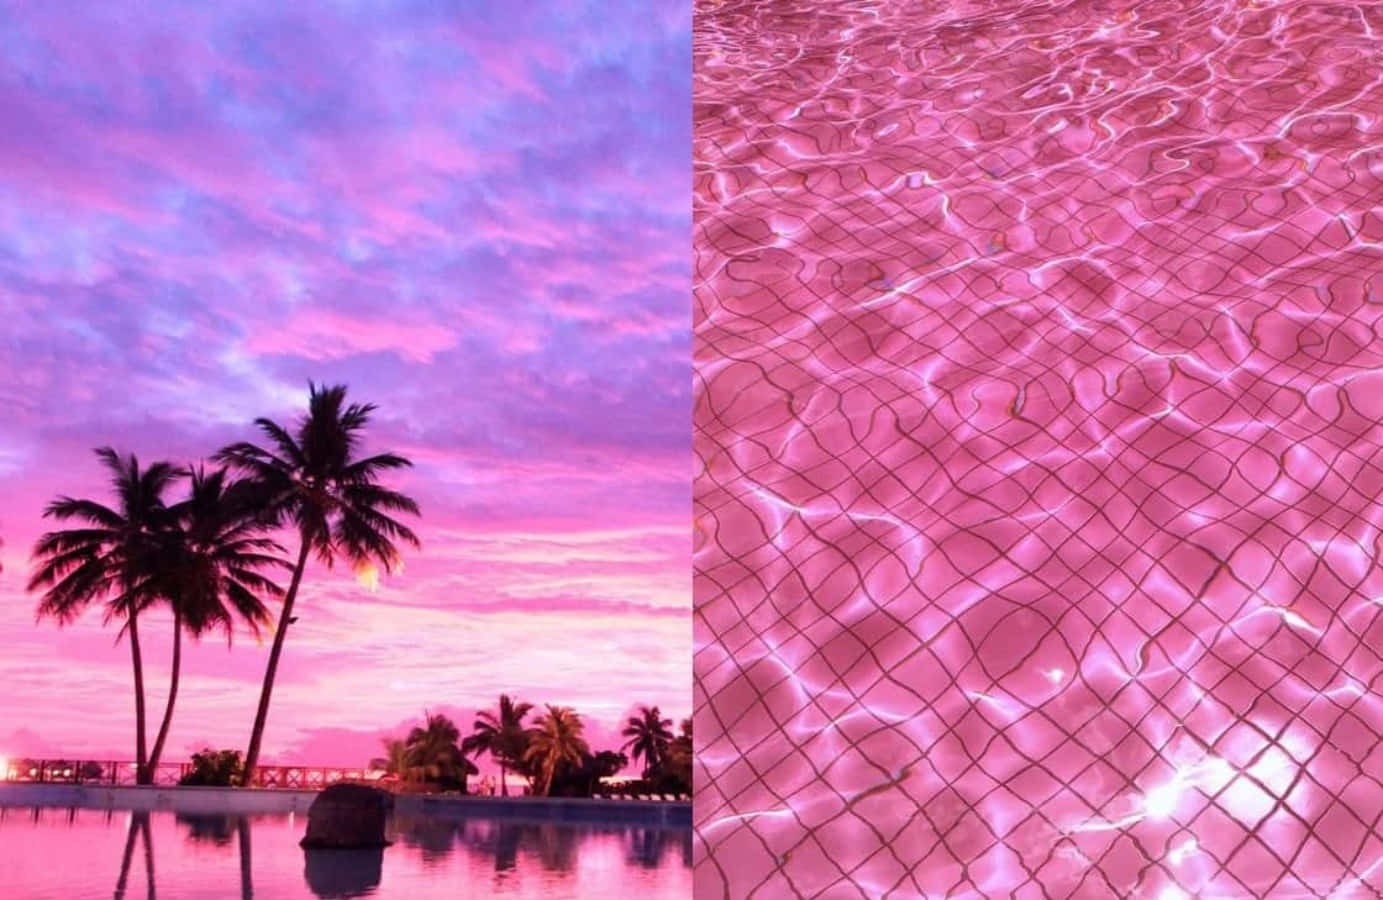 Aesthetic Pink Collage Sunset Sky And Pool Water Background